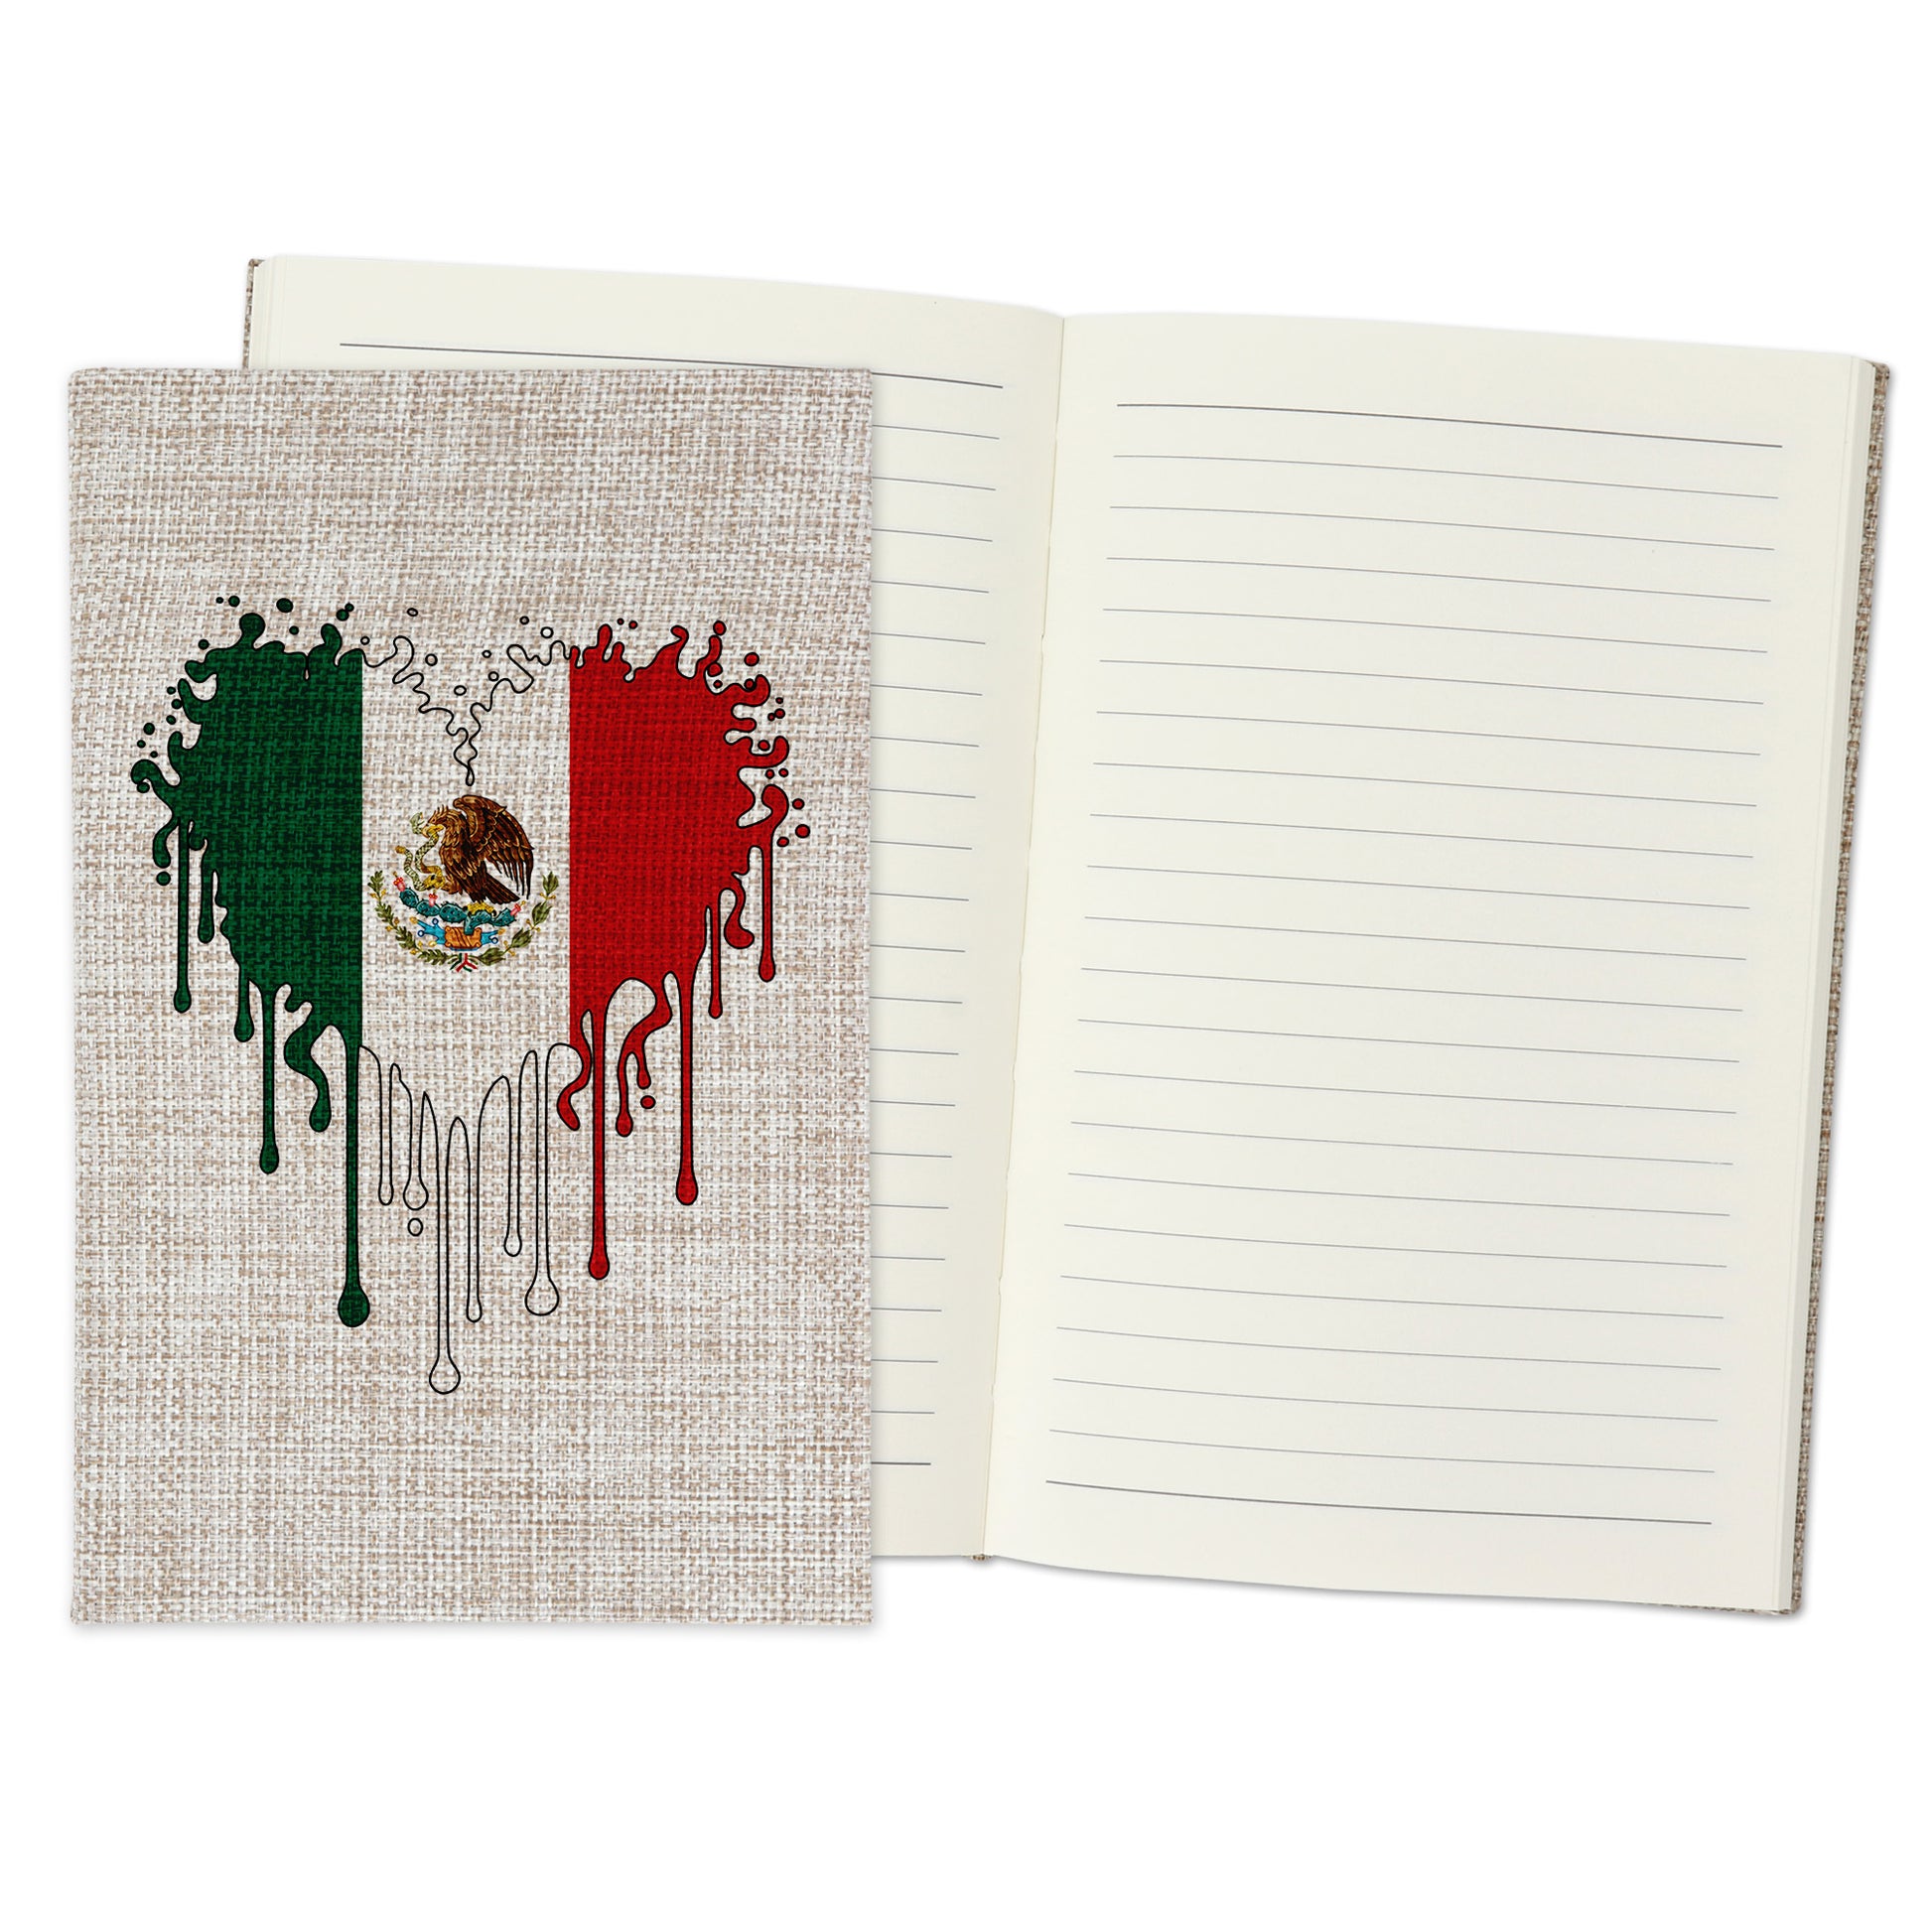 Mexico Flag - Dripping Heart Design Burlap Notebook Journal with Lined Pages